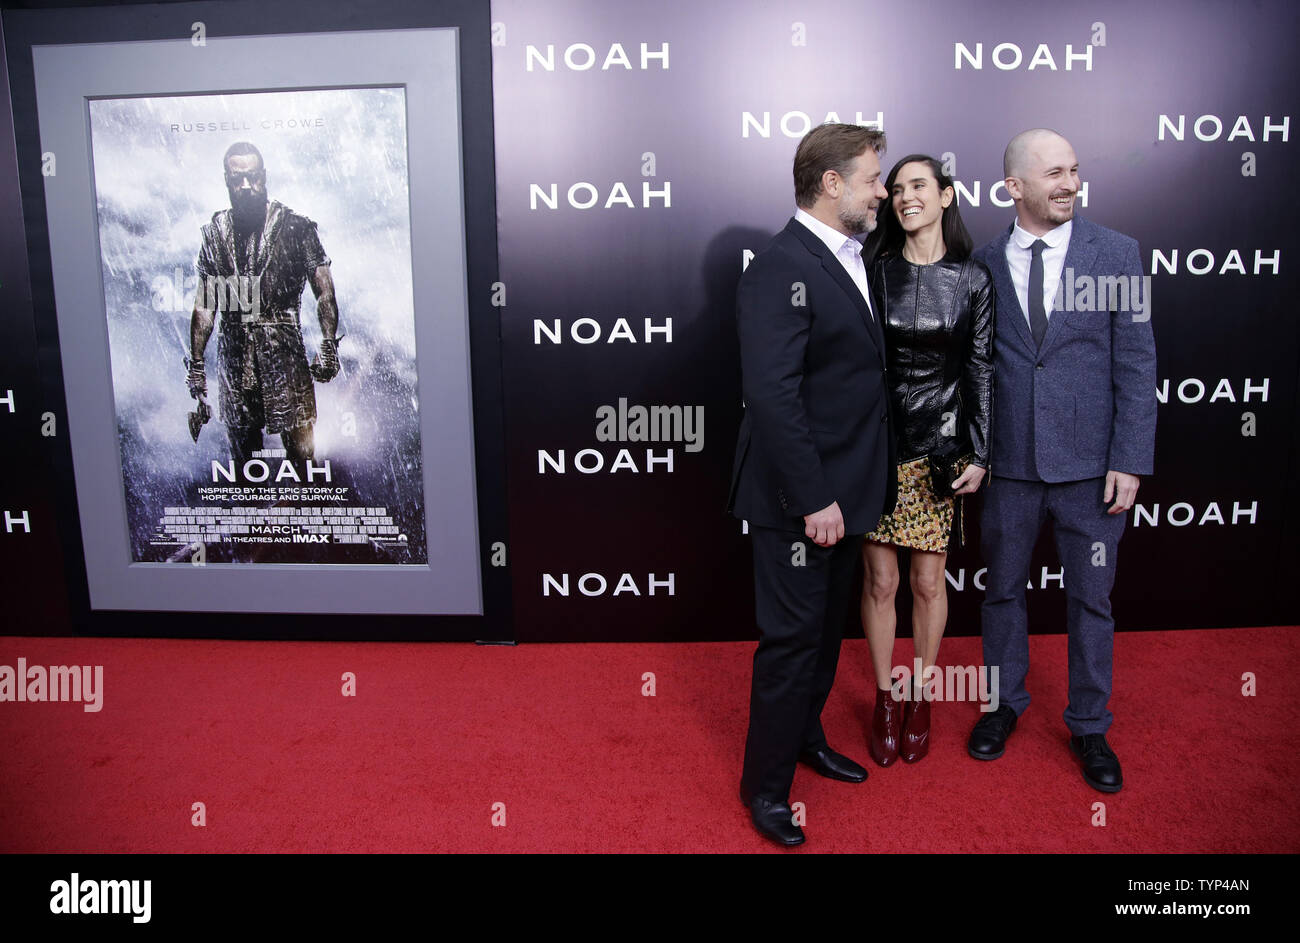 Director Darren Aronofsky, Jennifer Connelly and Russell Crowe arrive on the red carpet at the New York Premiere of Noah at the Ziegfeld Theatre in New York City on March 26, 2014.       UPI/John Angelillo Stock Photo